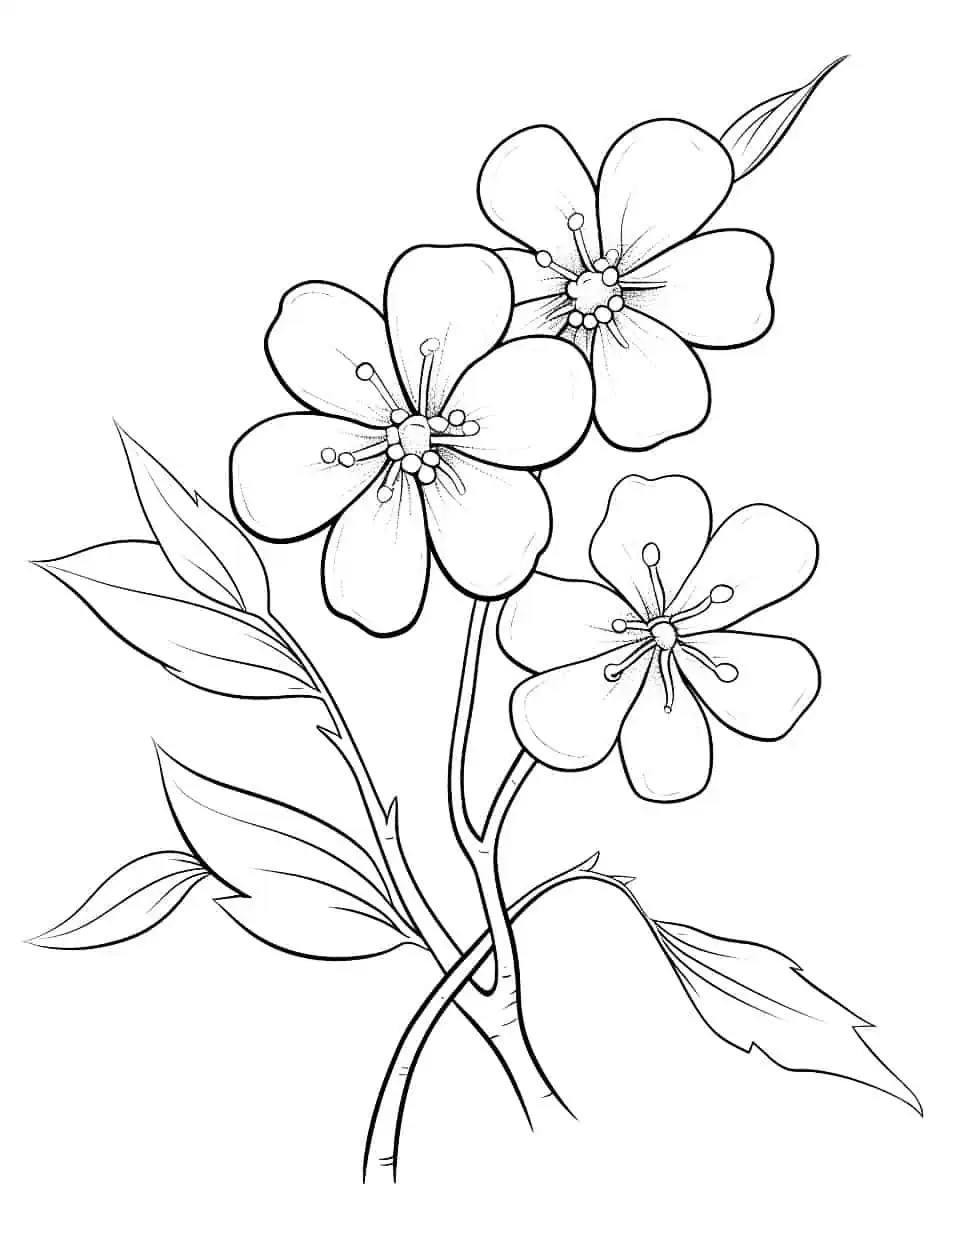 Blooming Cherry Blossoms Spring Coloring Page - A detailed coloring page of cherry blossoms blooming, perfect for older children.